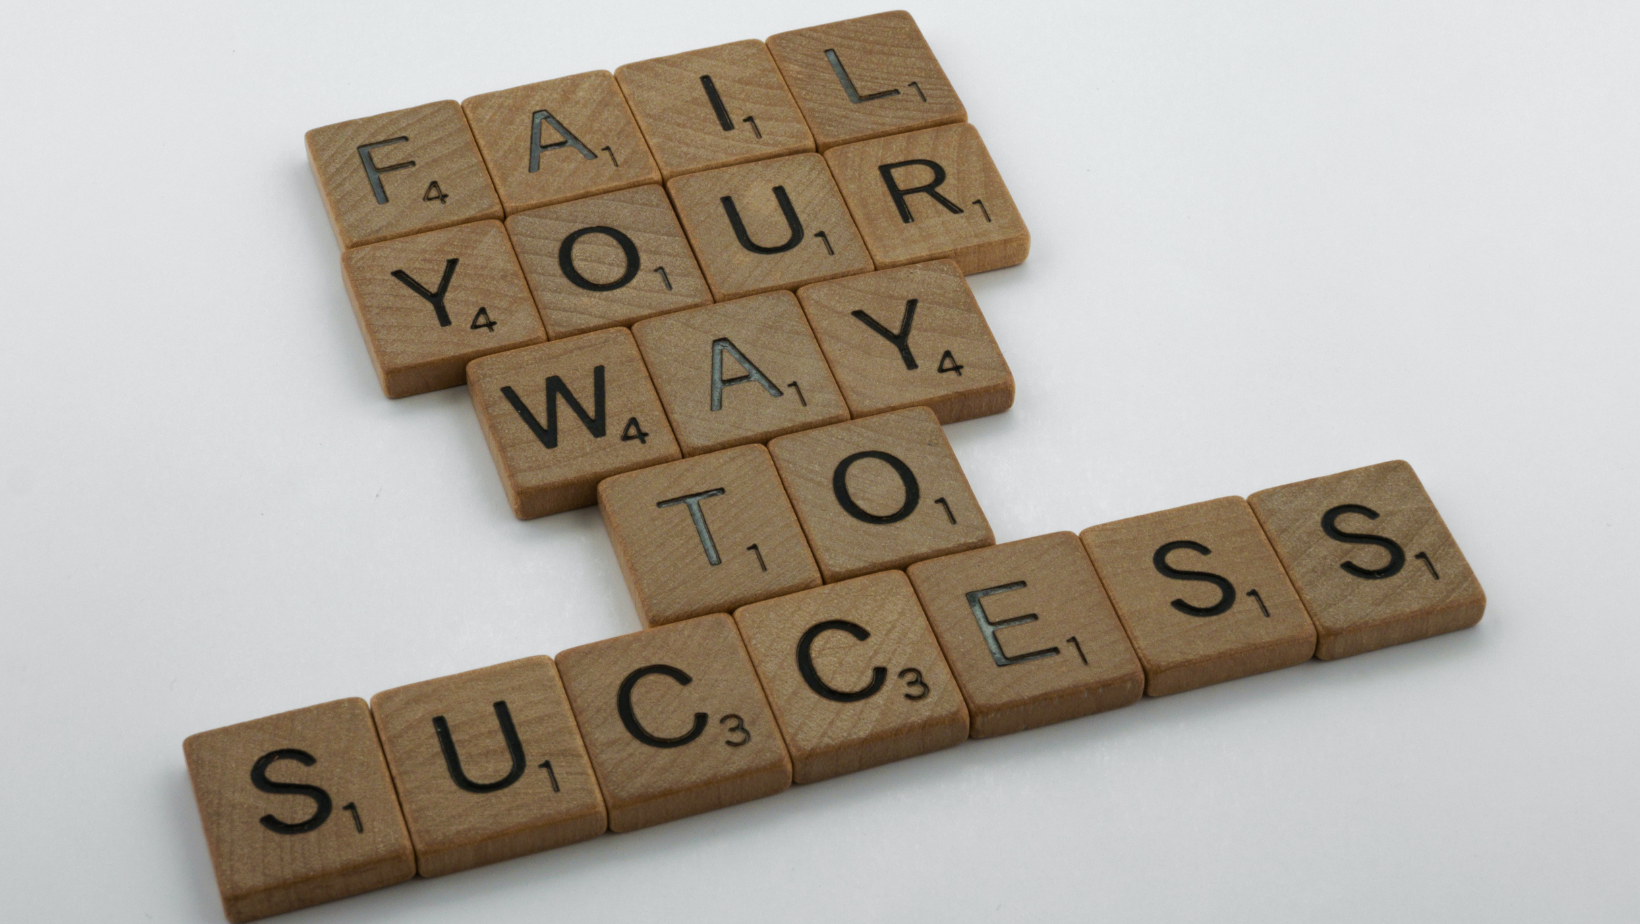 Scrabble tiles have been laid out on a white surface to read fail your way to success.